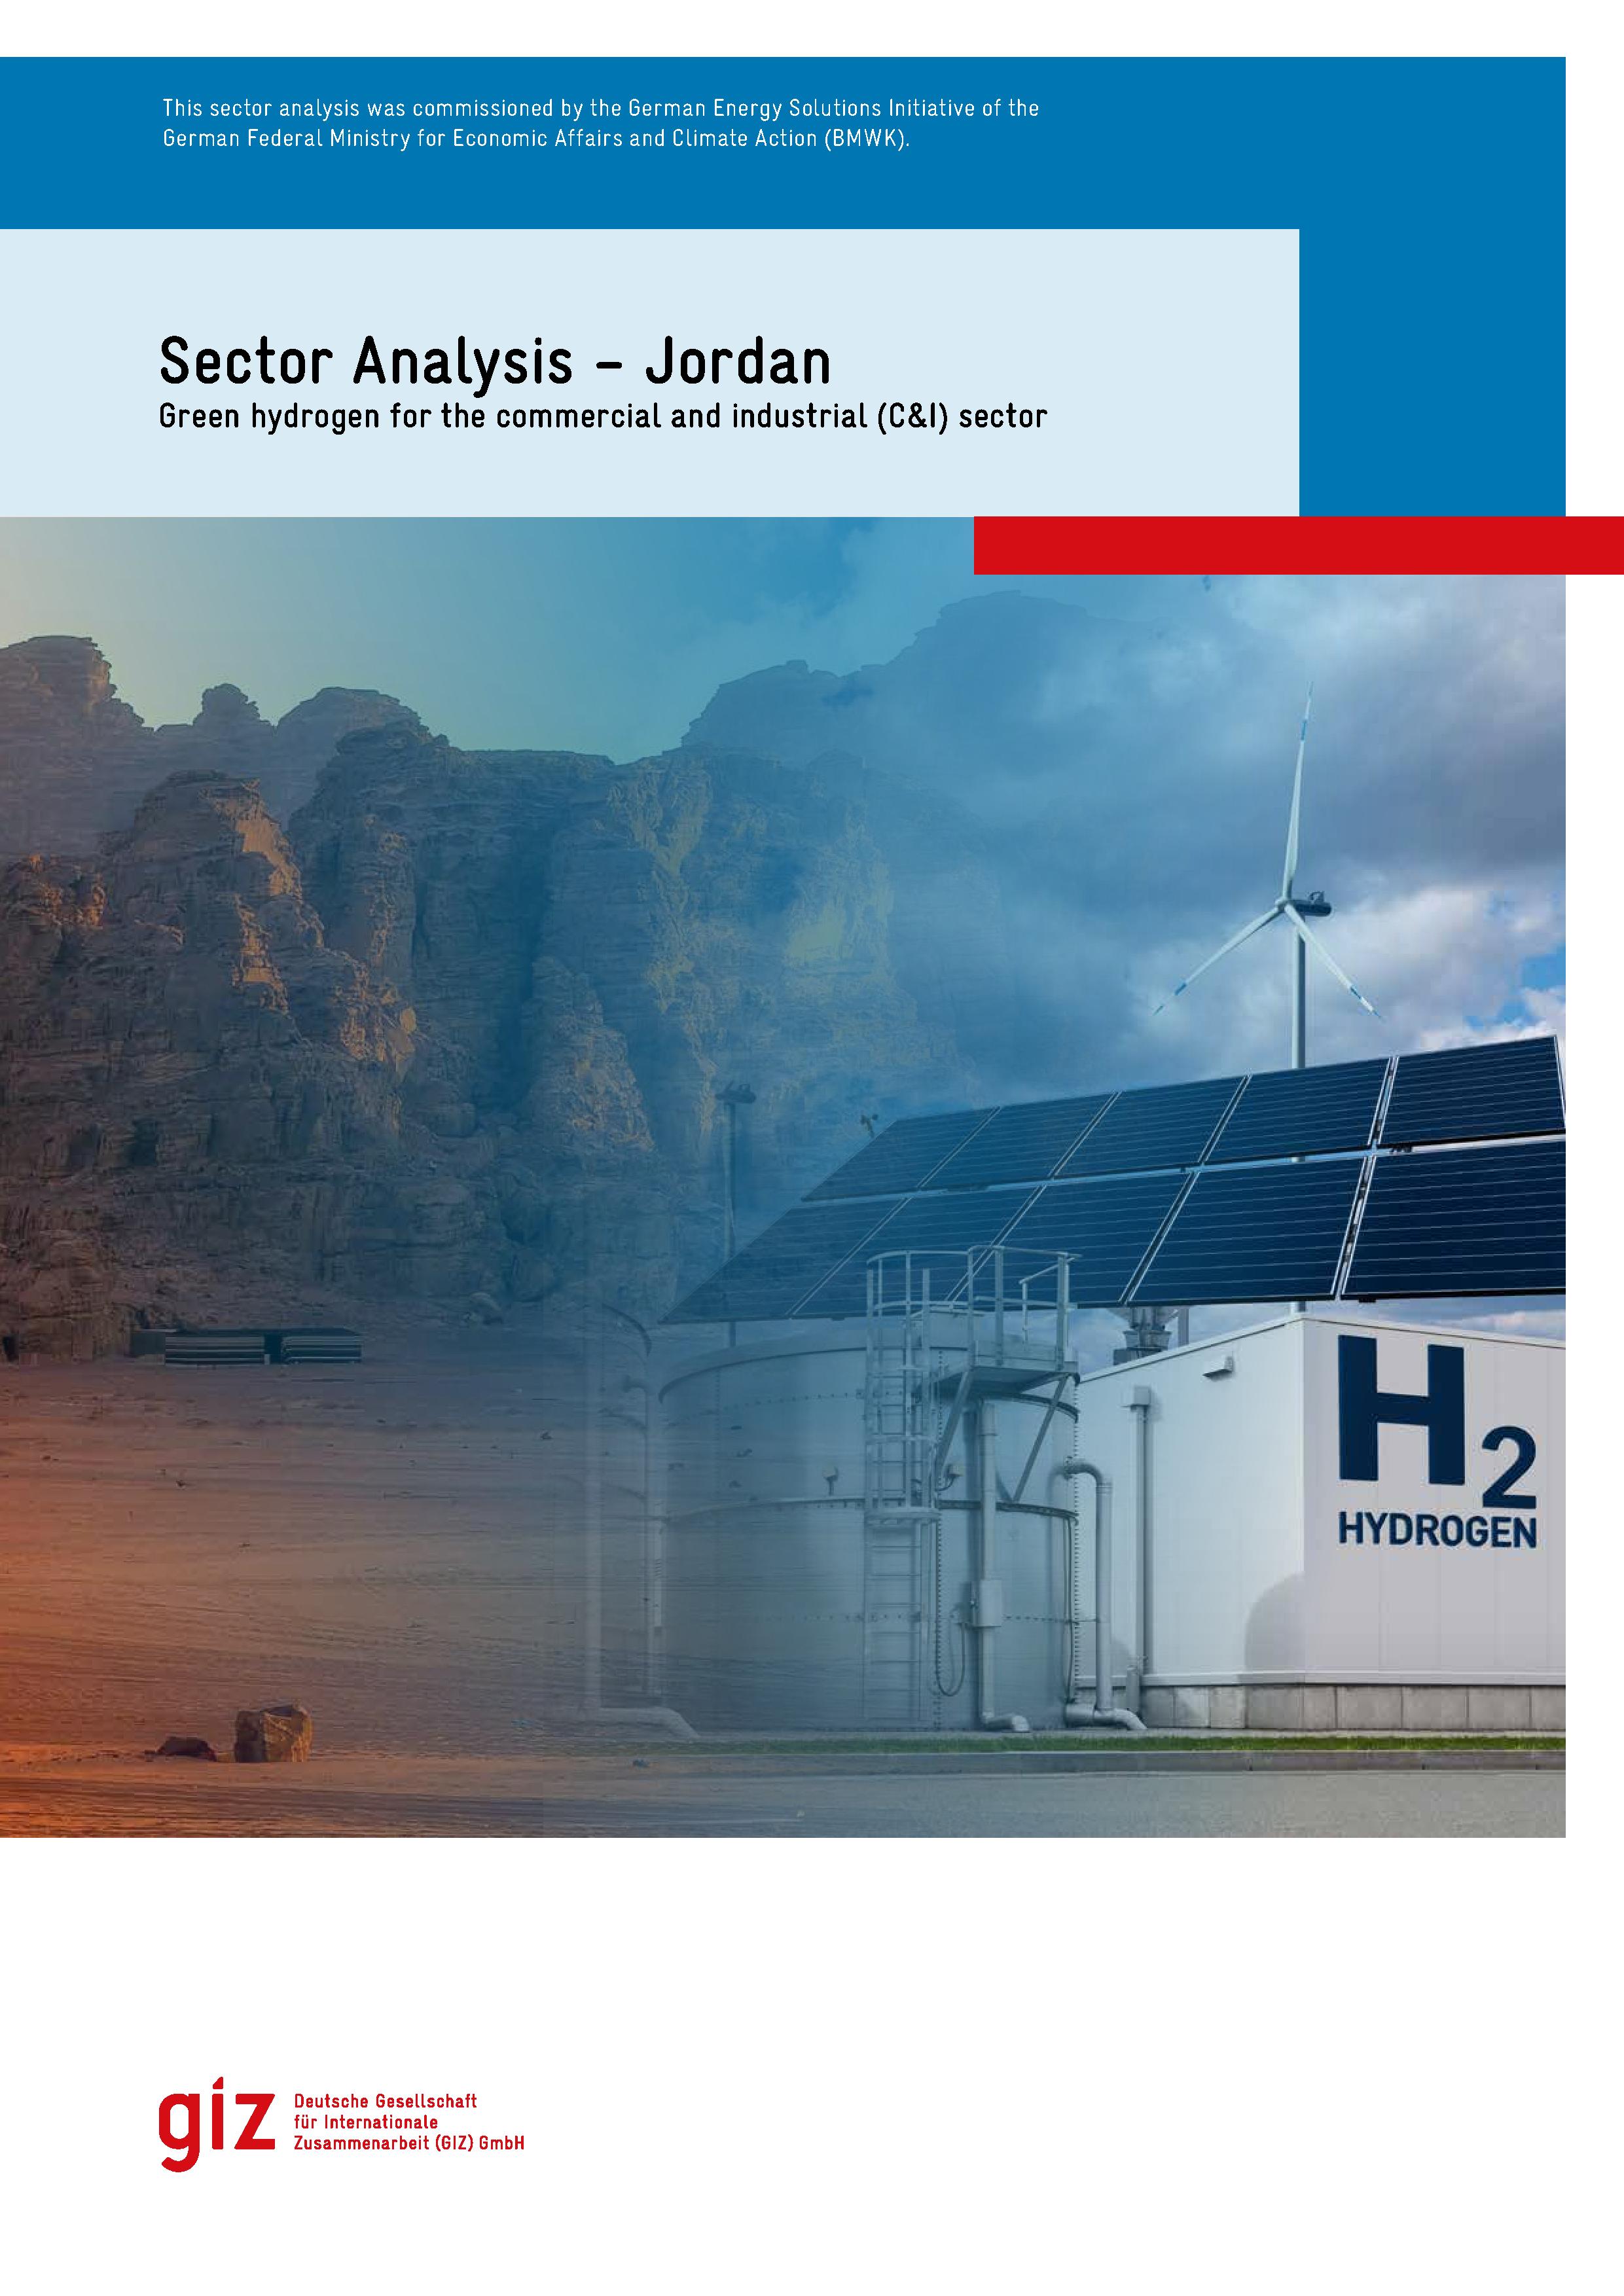 Green hydrogen for the commercial and industrial (C&I) sector in Jordan